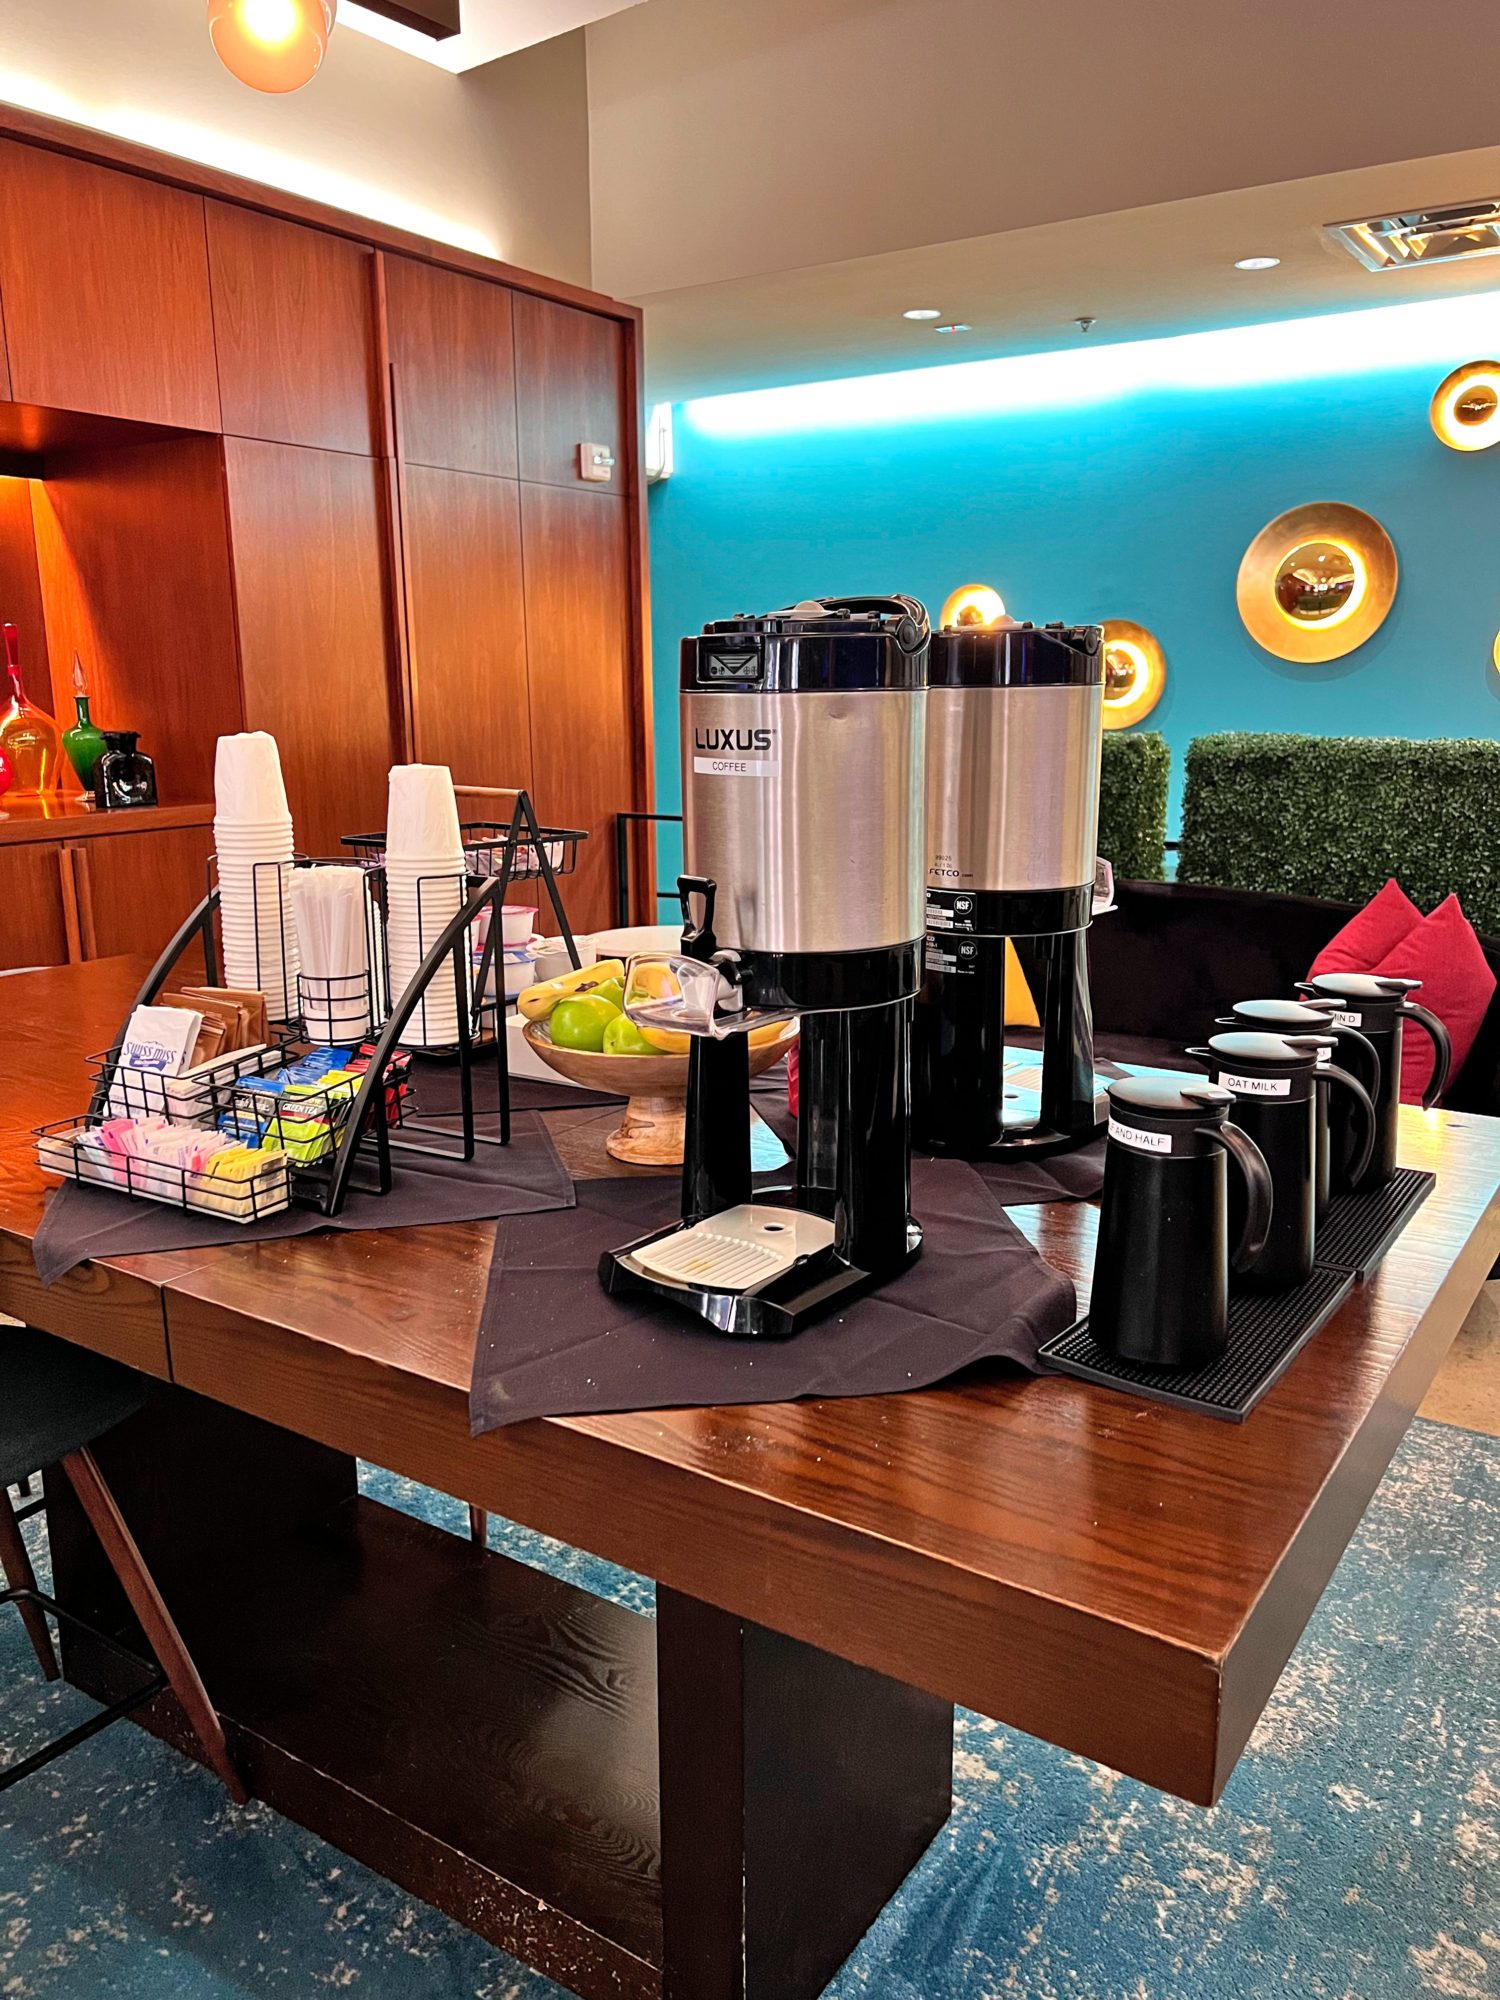 A table is set with coffee and grab-and-go breakfast items